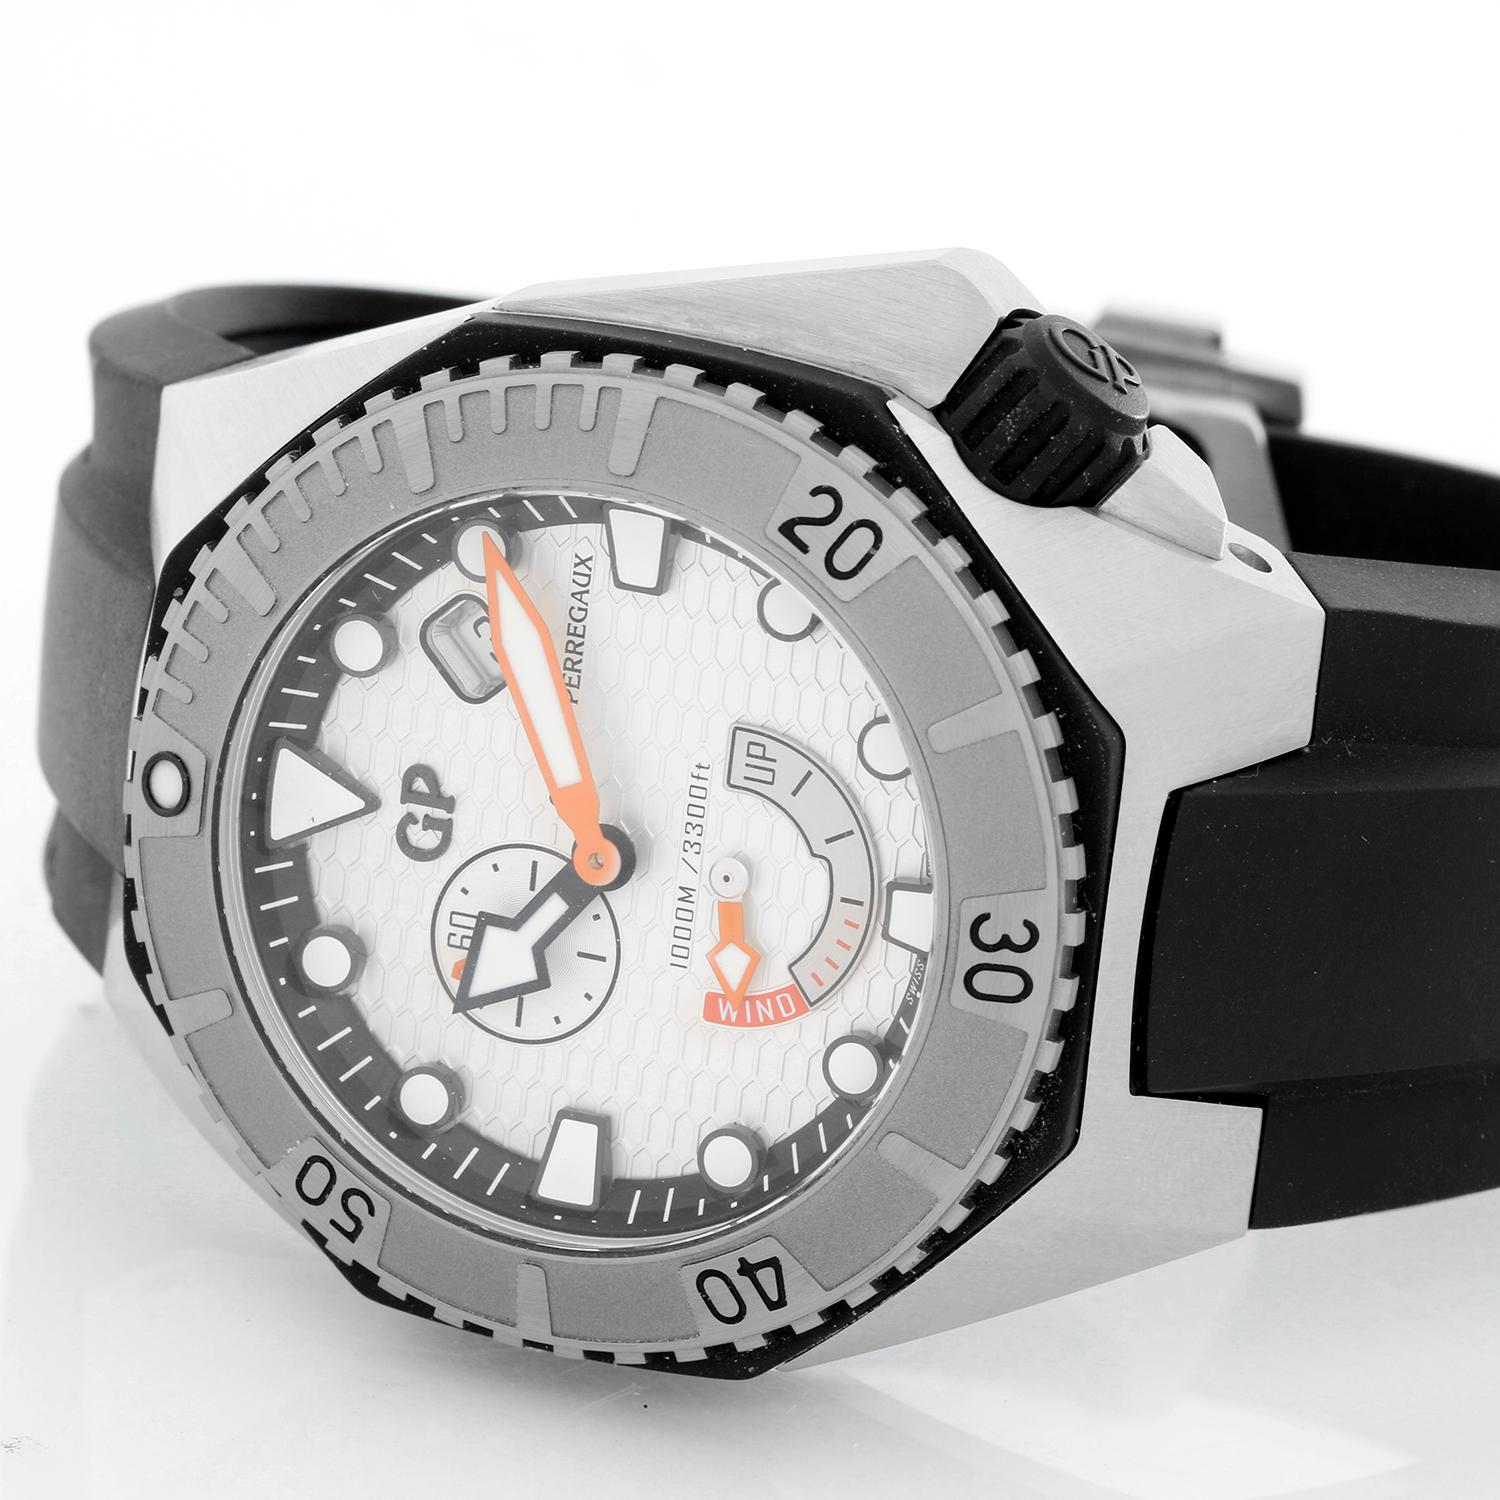 Girard-Perregaux Sea Hawk Men's Stainless Steel Automatic Watch 49960 - Automatic winding. Stainless steel case with rotating bezel (44mm diameter). Silver dial with luminous hour markers.  Orange minute and seconds hand, date between 1 & 2 o'clock;